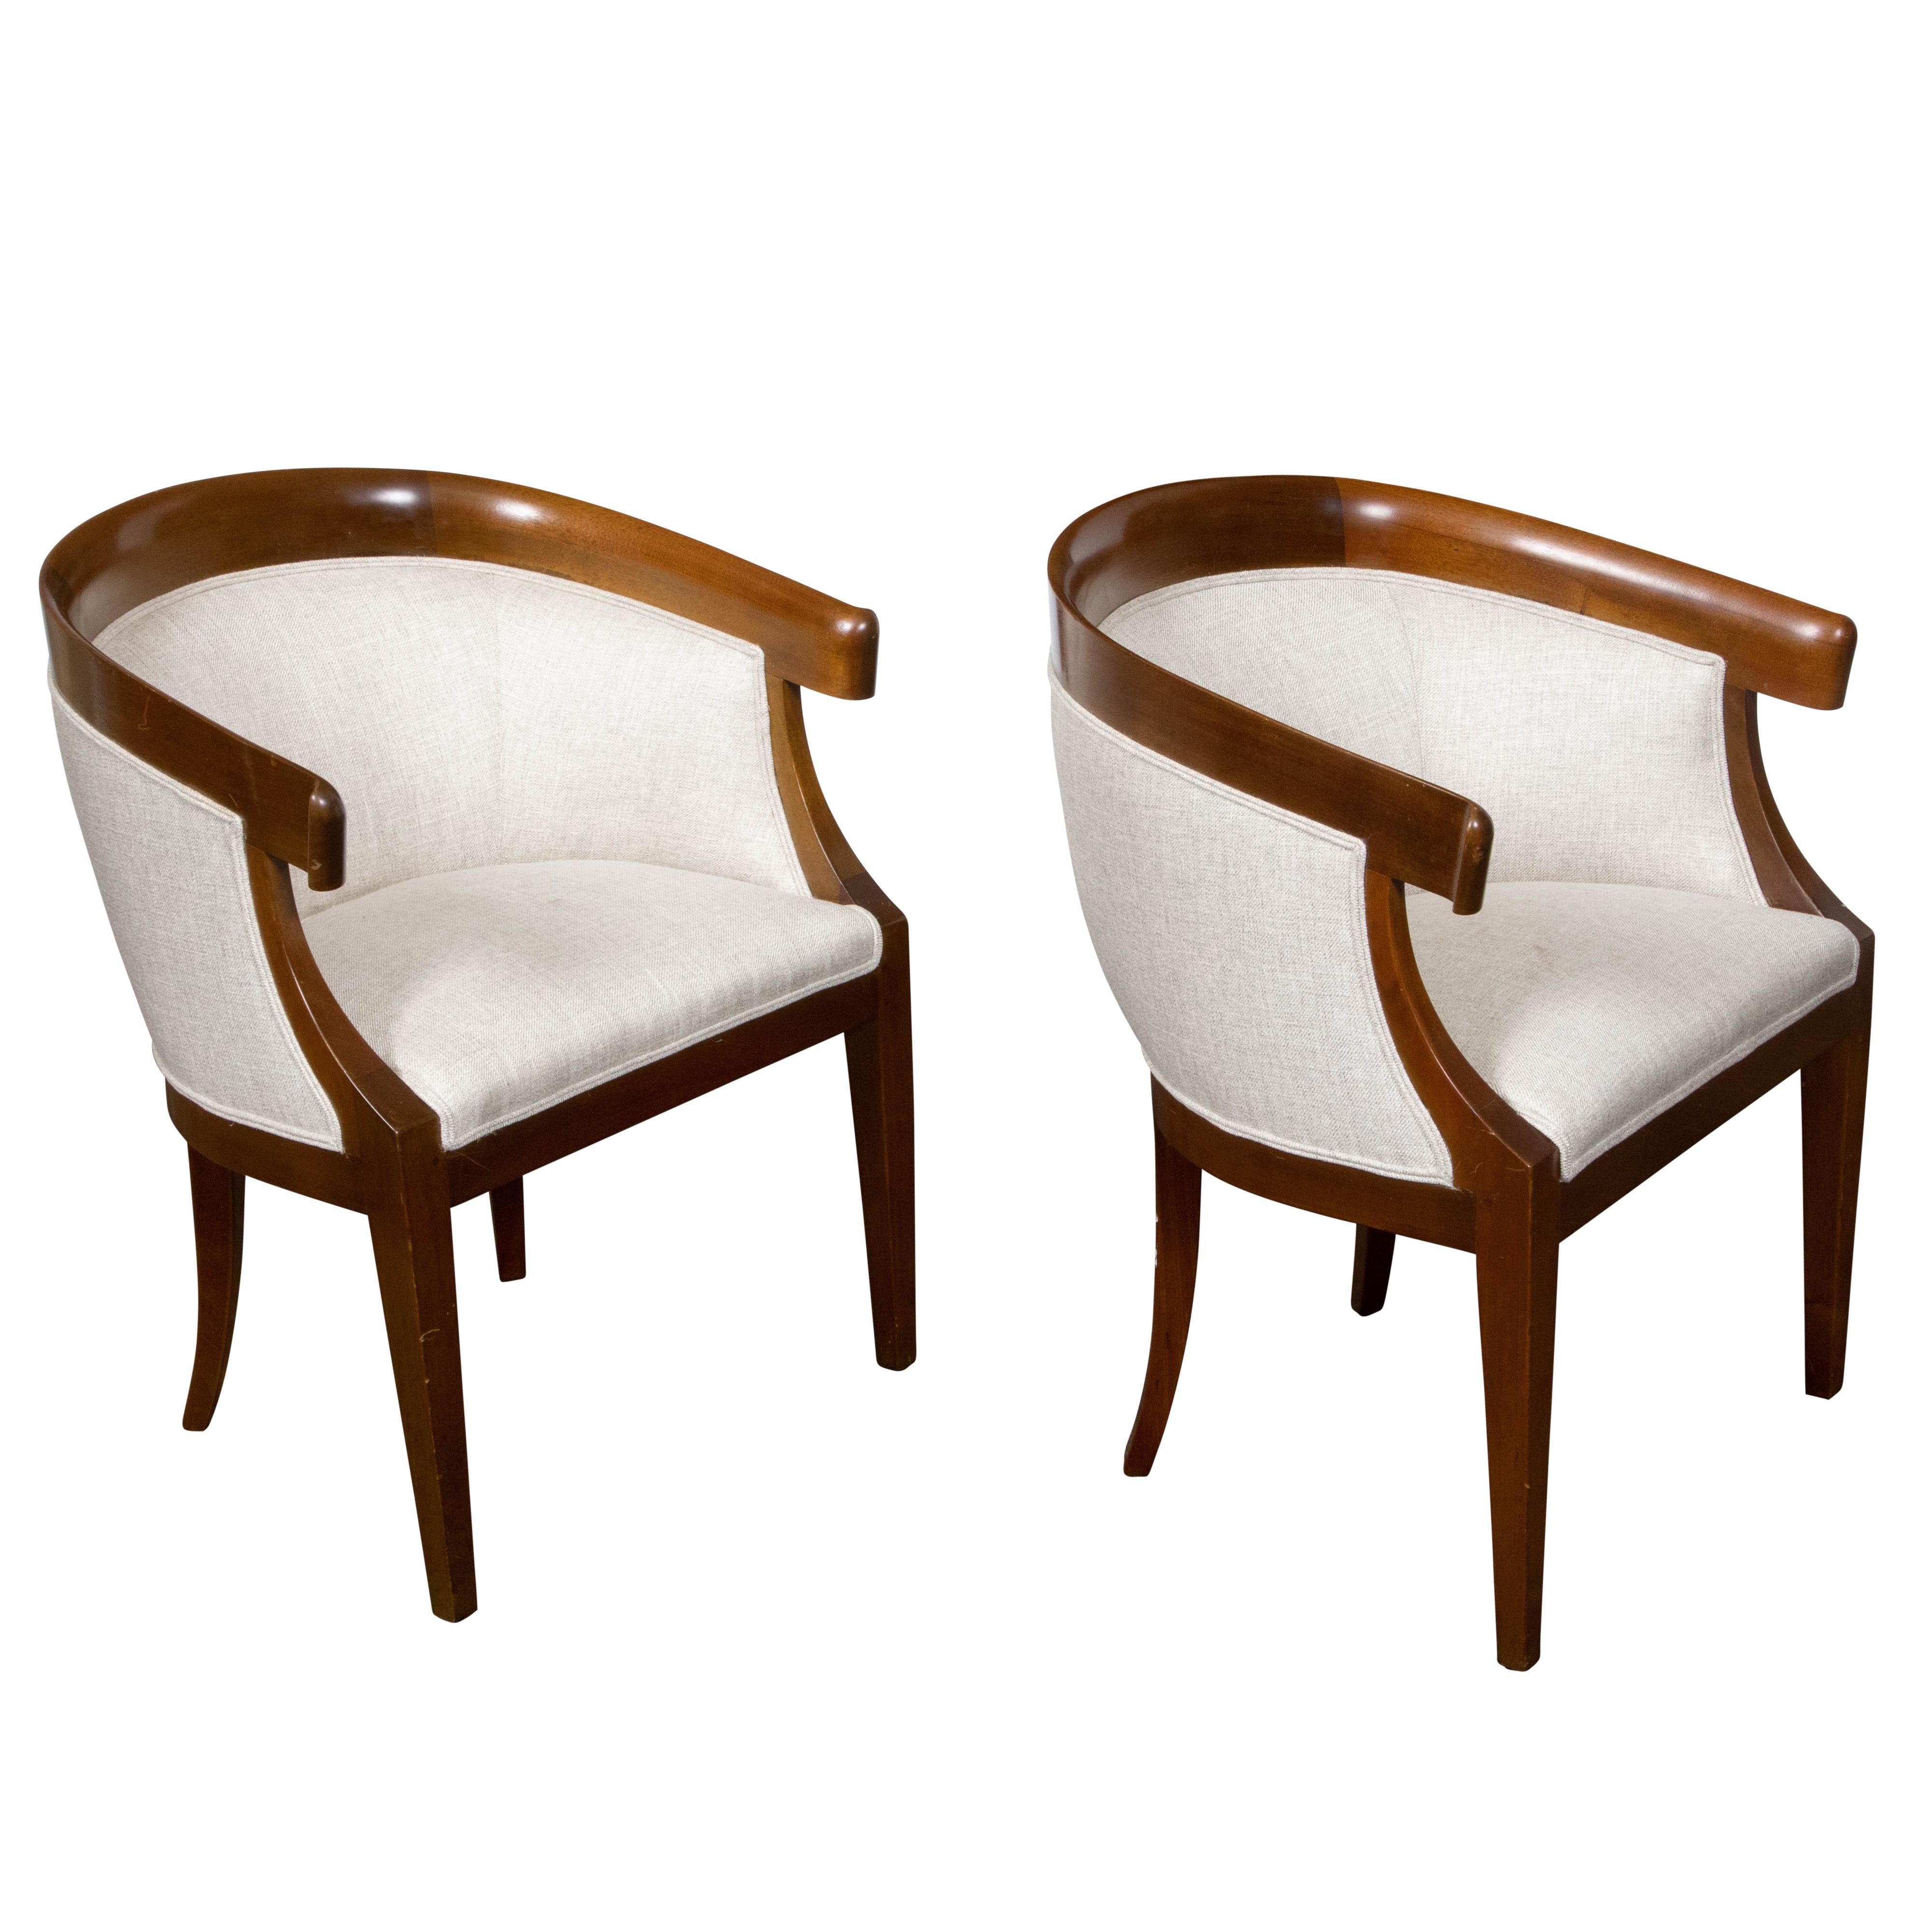 Pair of French Art Deco Period 1930s Walnut Horseshoe Back Upholstered Armchairs For Sale 2